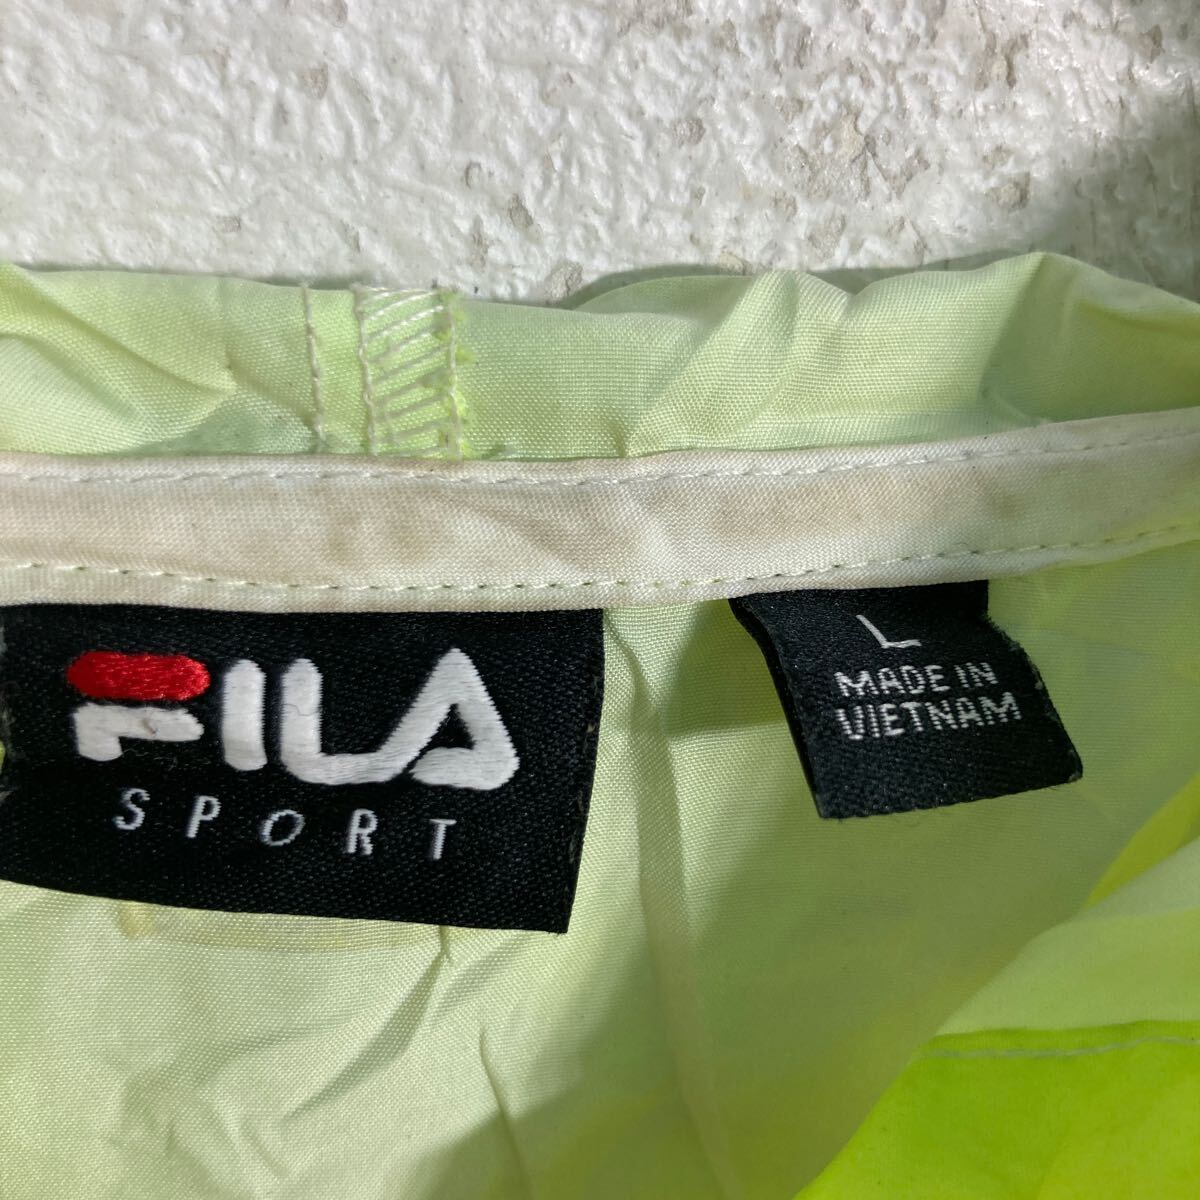 FILA nylon jacket L neon yellow green navy gradation filler Zip up old clothes . America buying up a604-6855